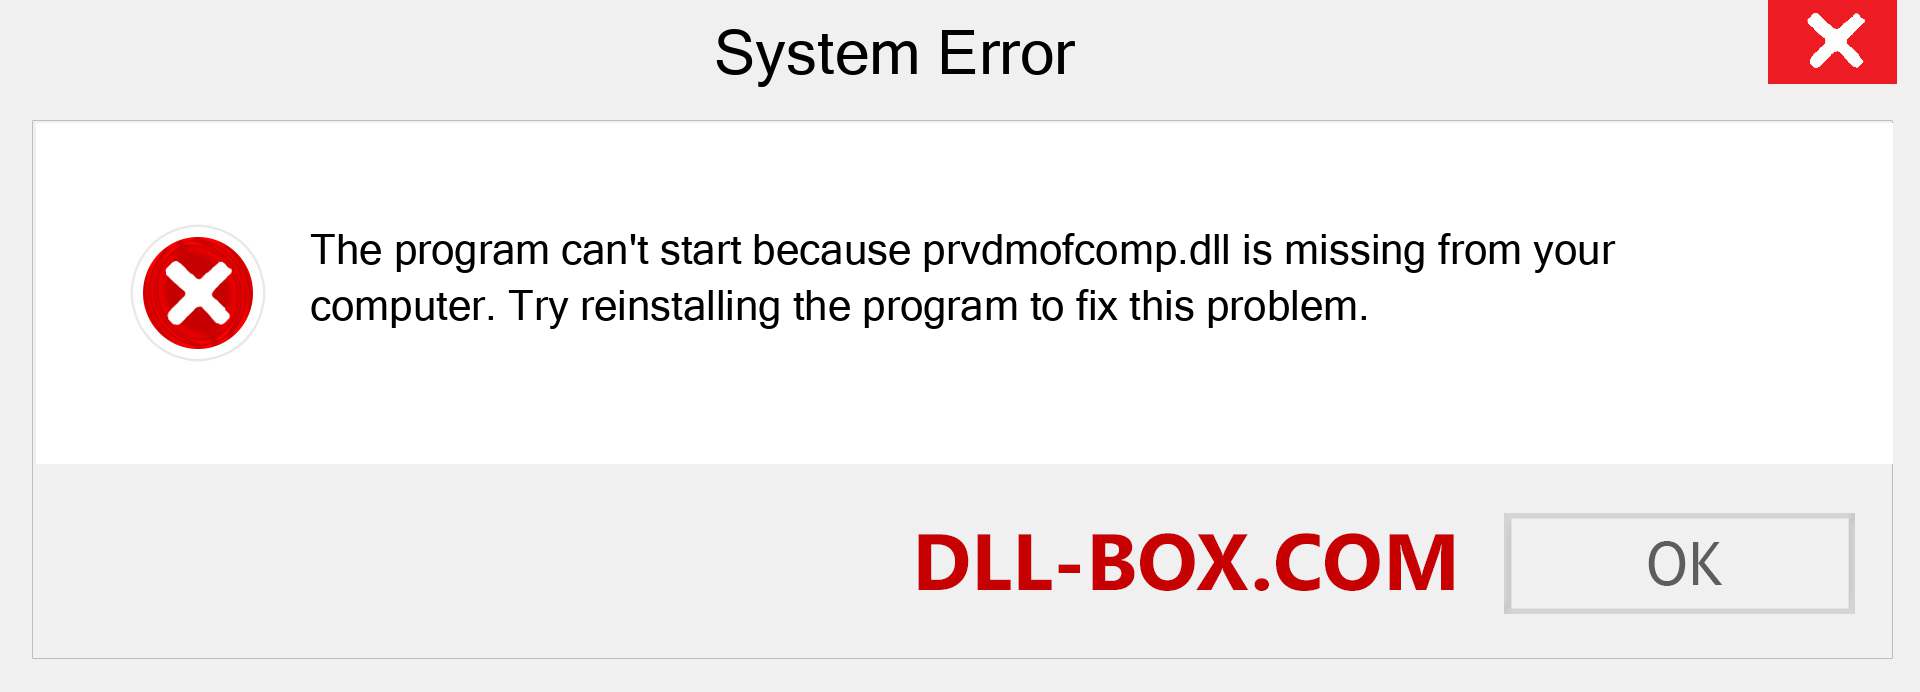  prvdmofcomp.dll file is missing?. Download for Windows 7, 8, 10 - Fix  prvdmofcomp dll Missing Error on Windows, photos, images